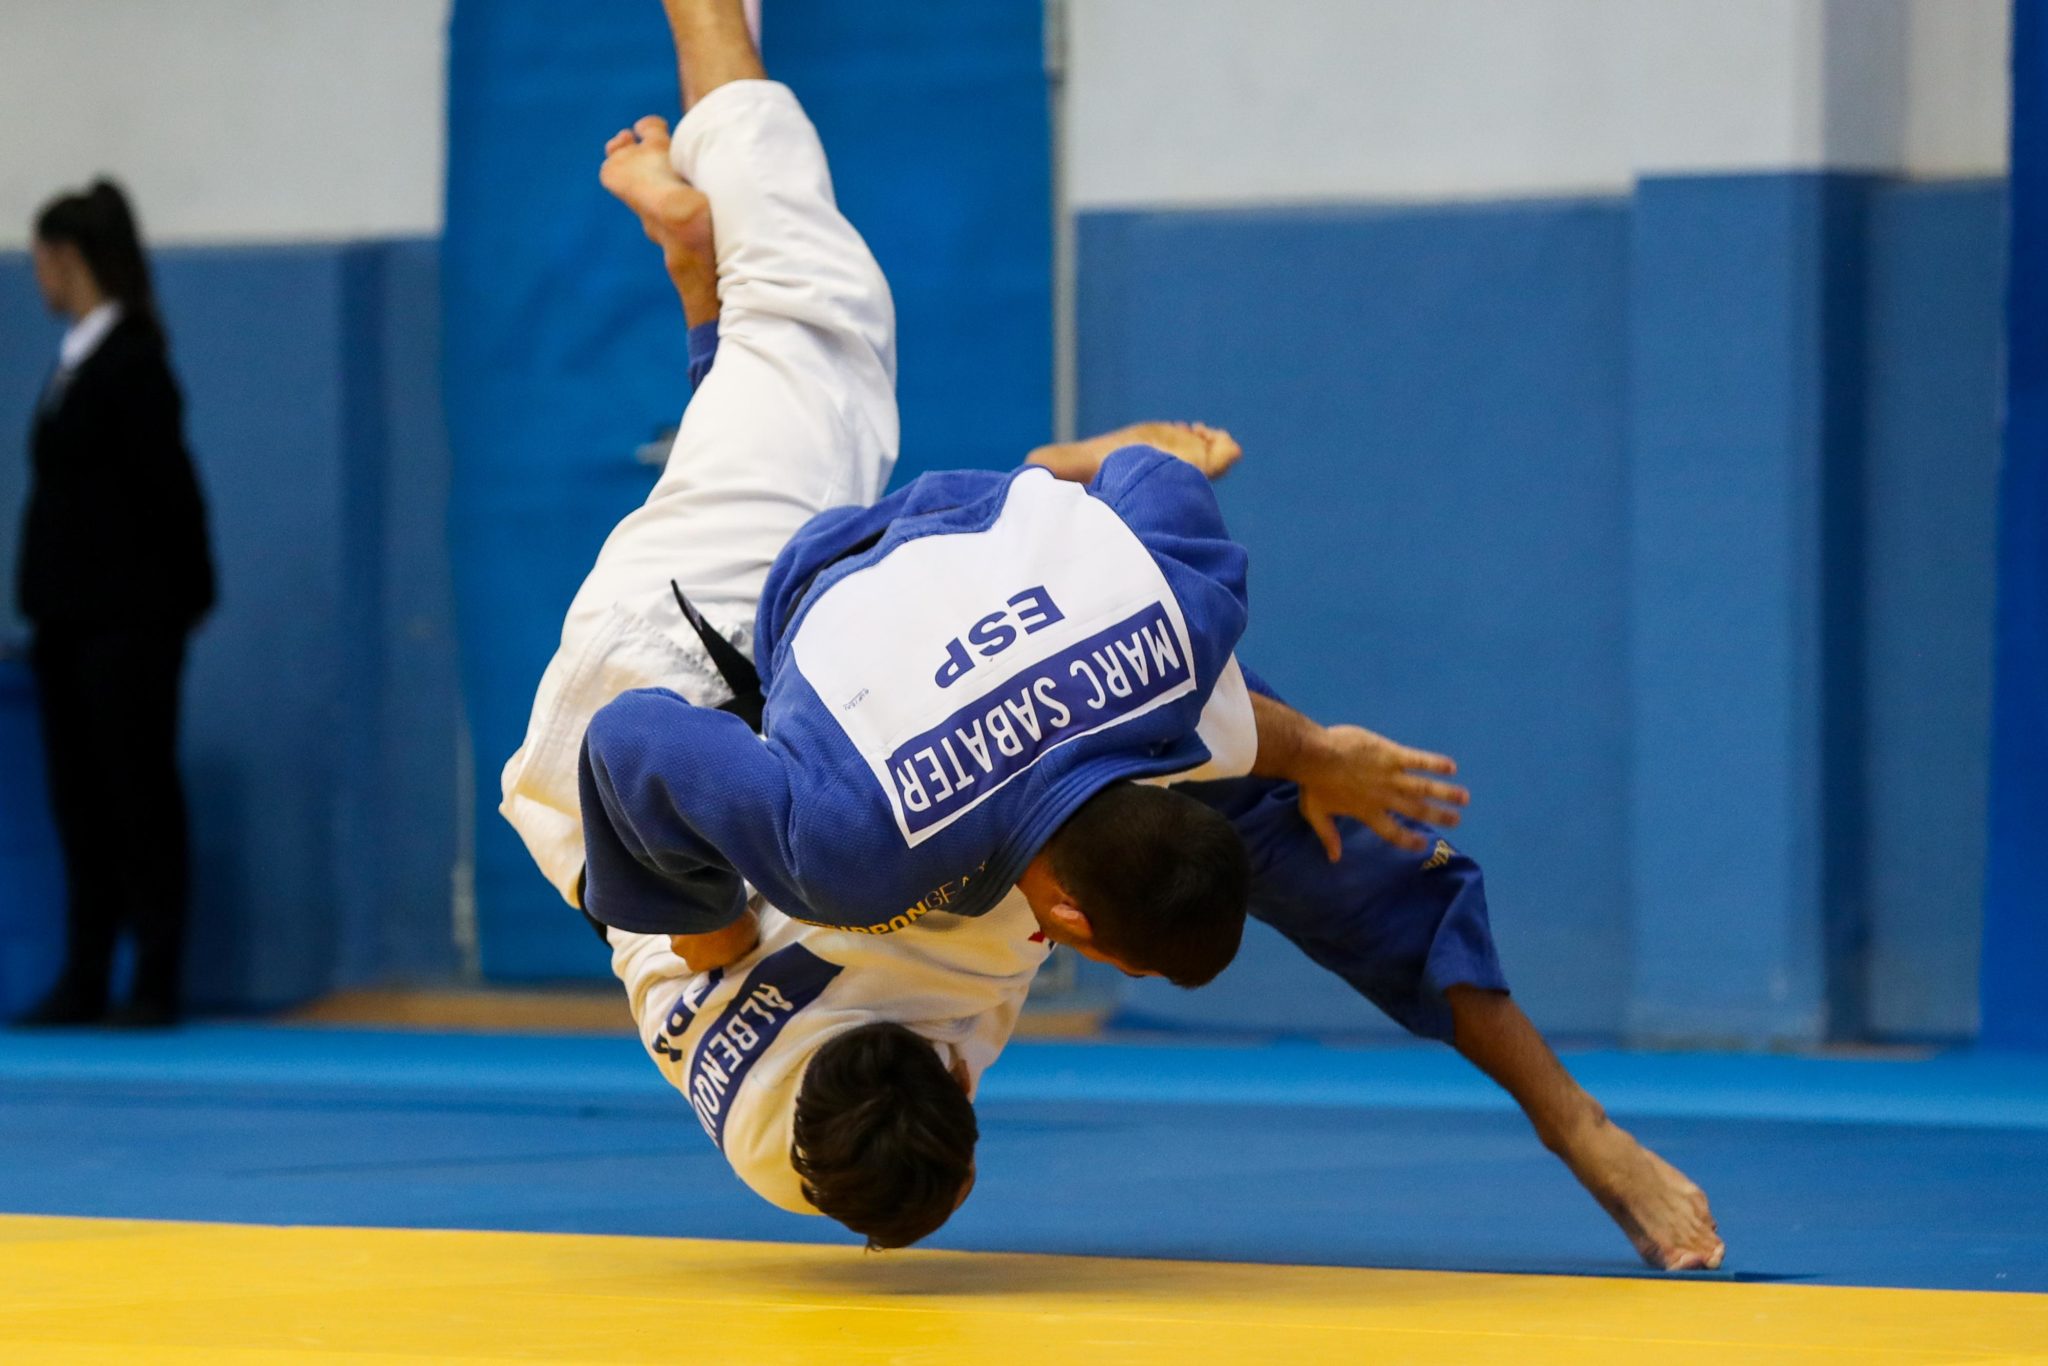 SPAIN WELCOMES JUDOKA OF ALL LEVELS FOR THE MALAGA EUROPEAN OPEN